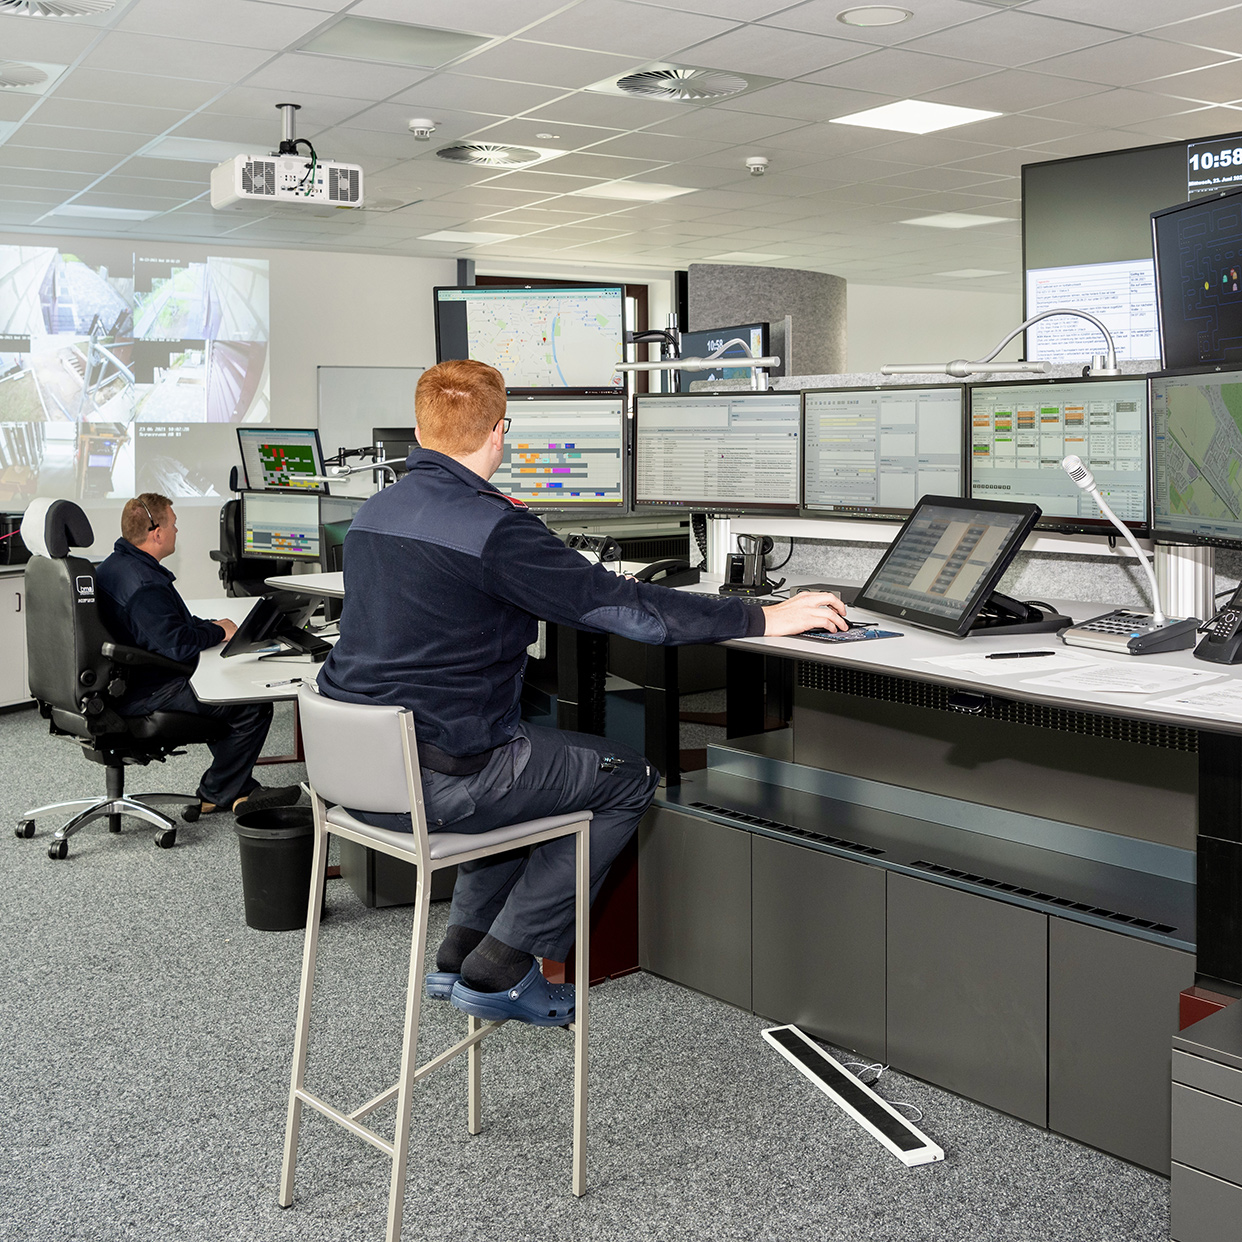 County Control Center Kleve